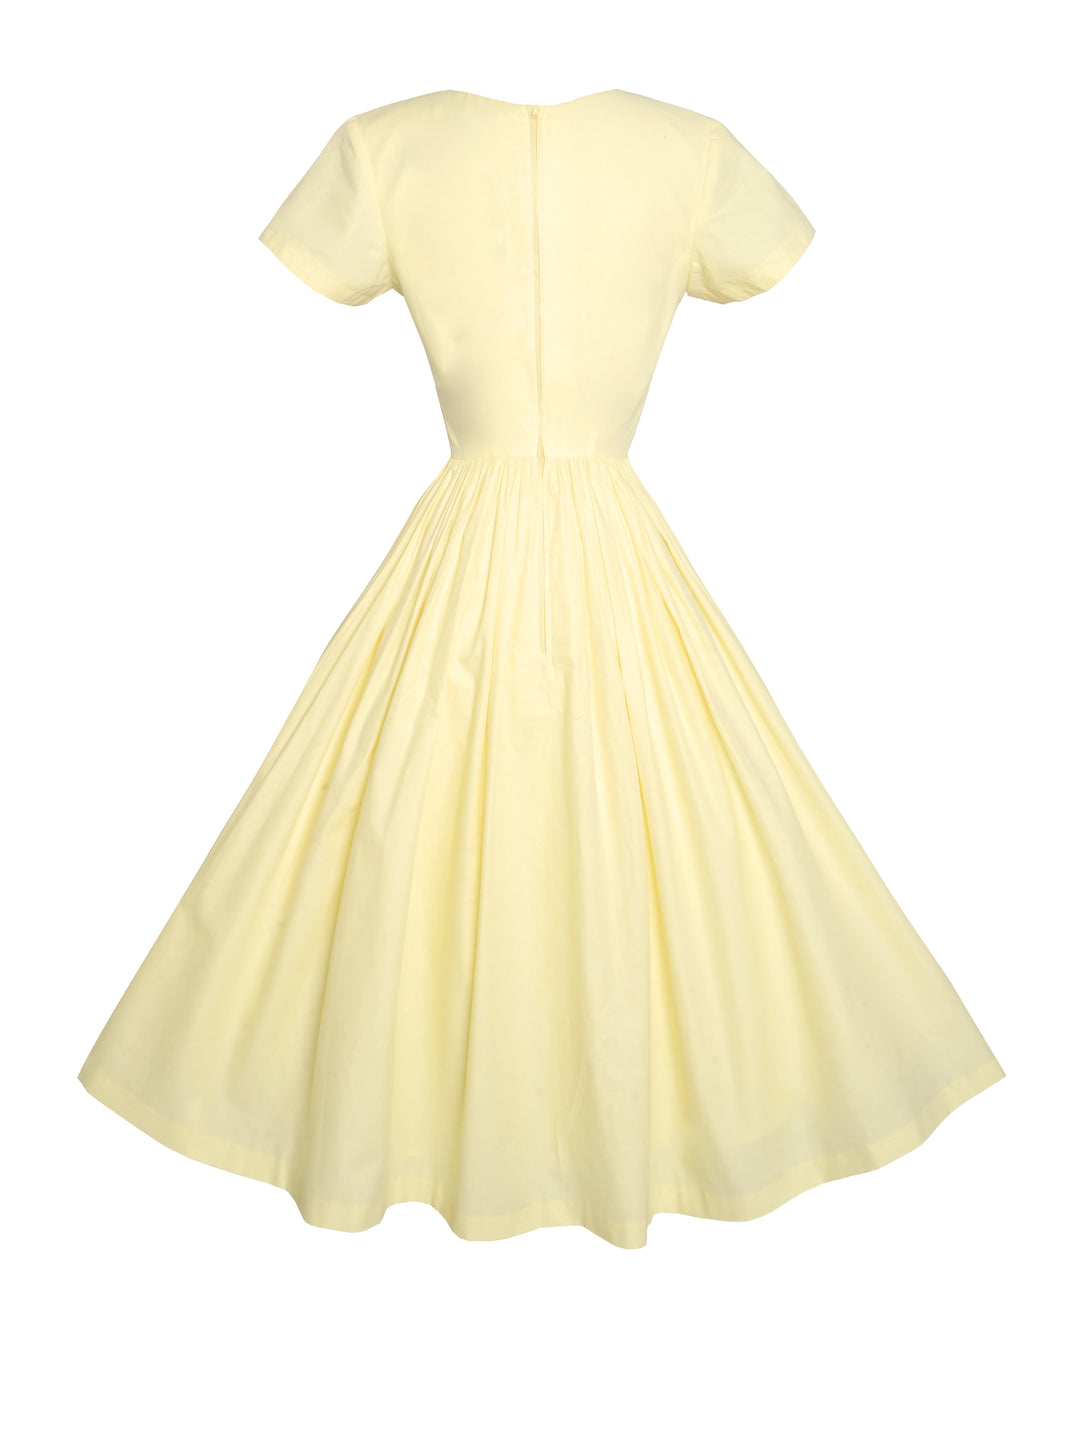 MTO - Dorothy Dress "I can't believe its not Butter" in Light Pale Yellow Cotton